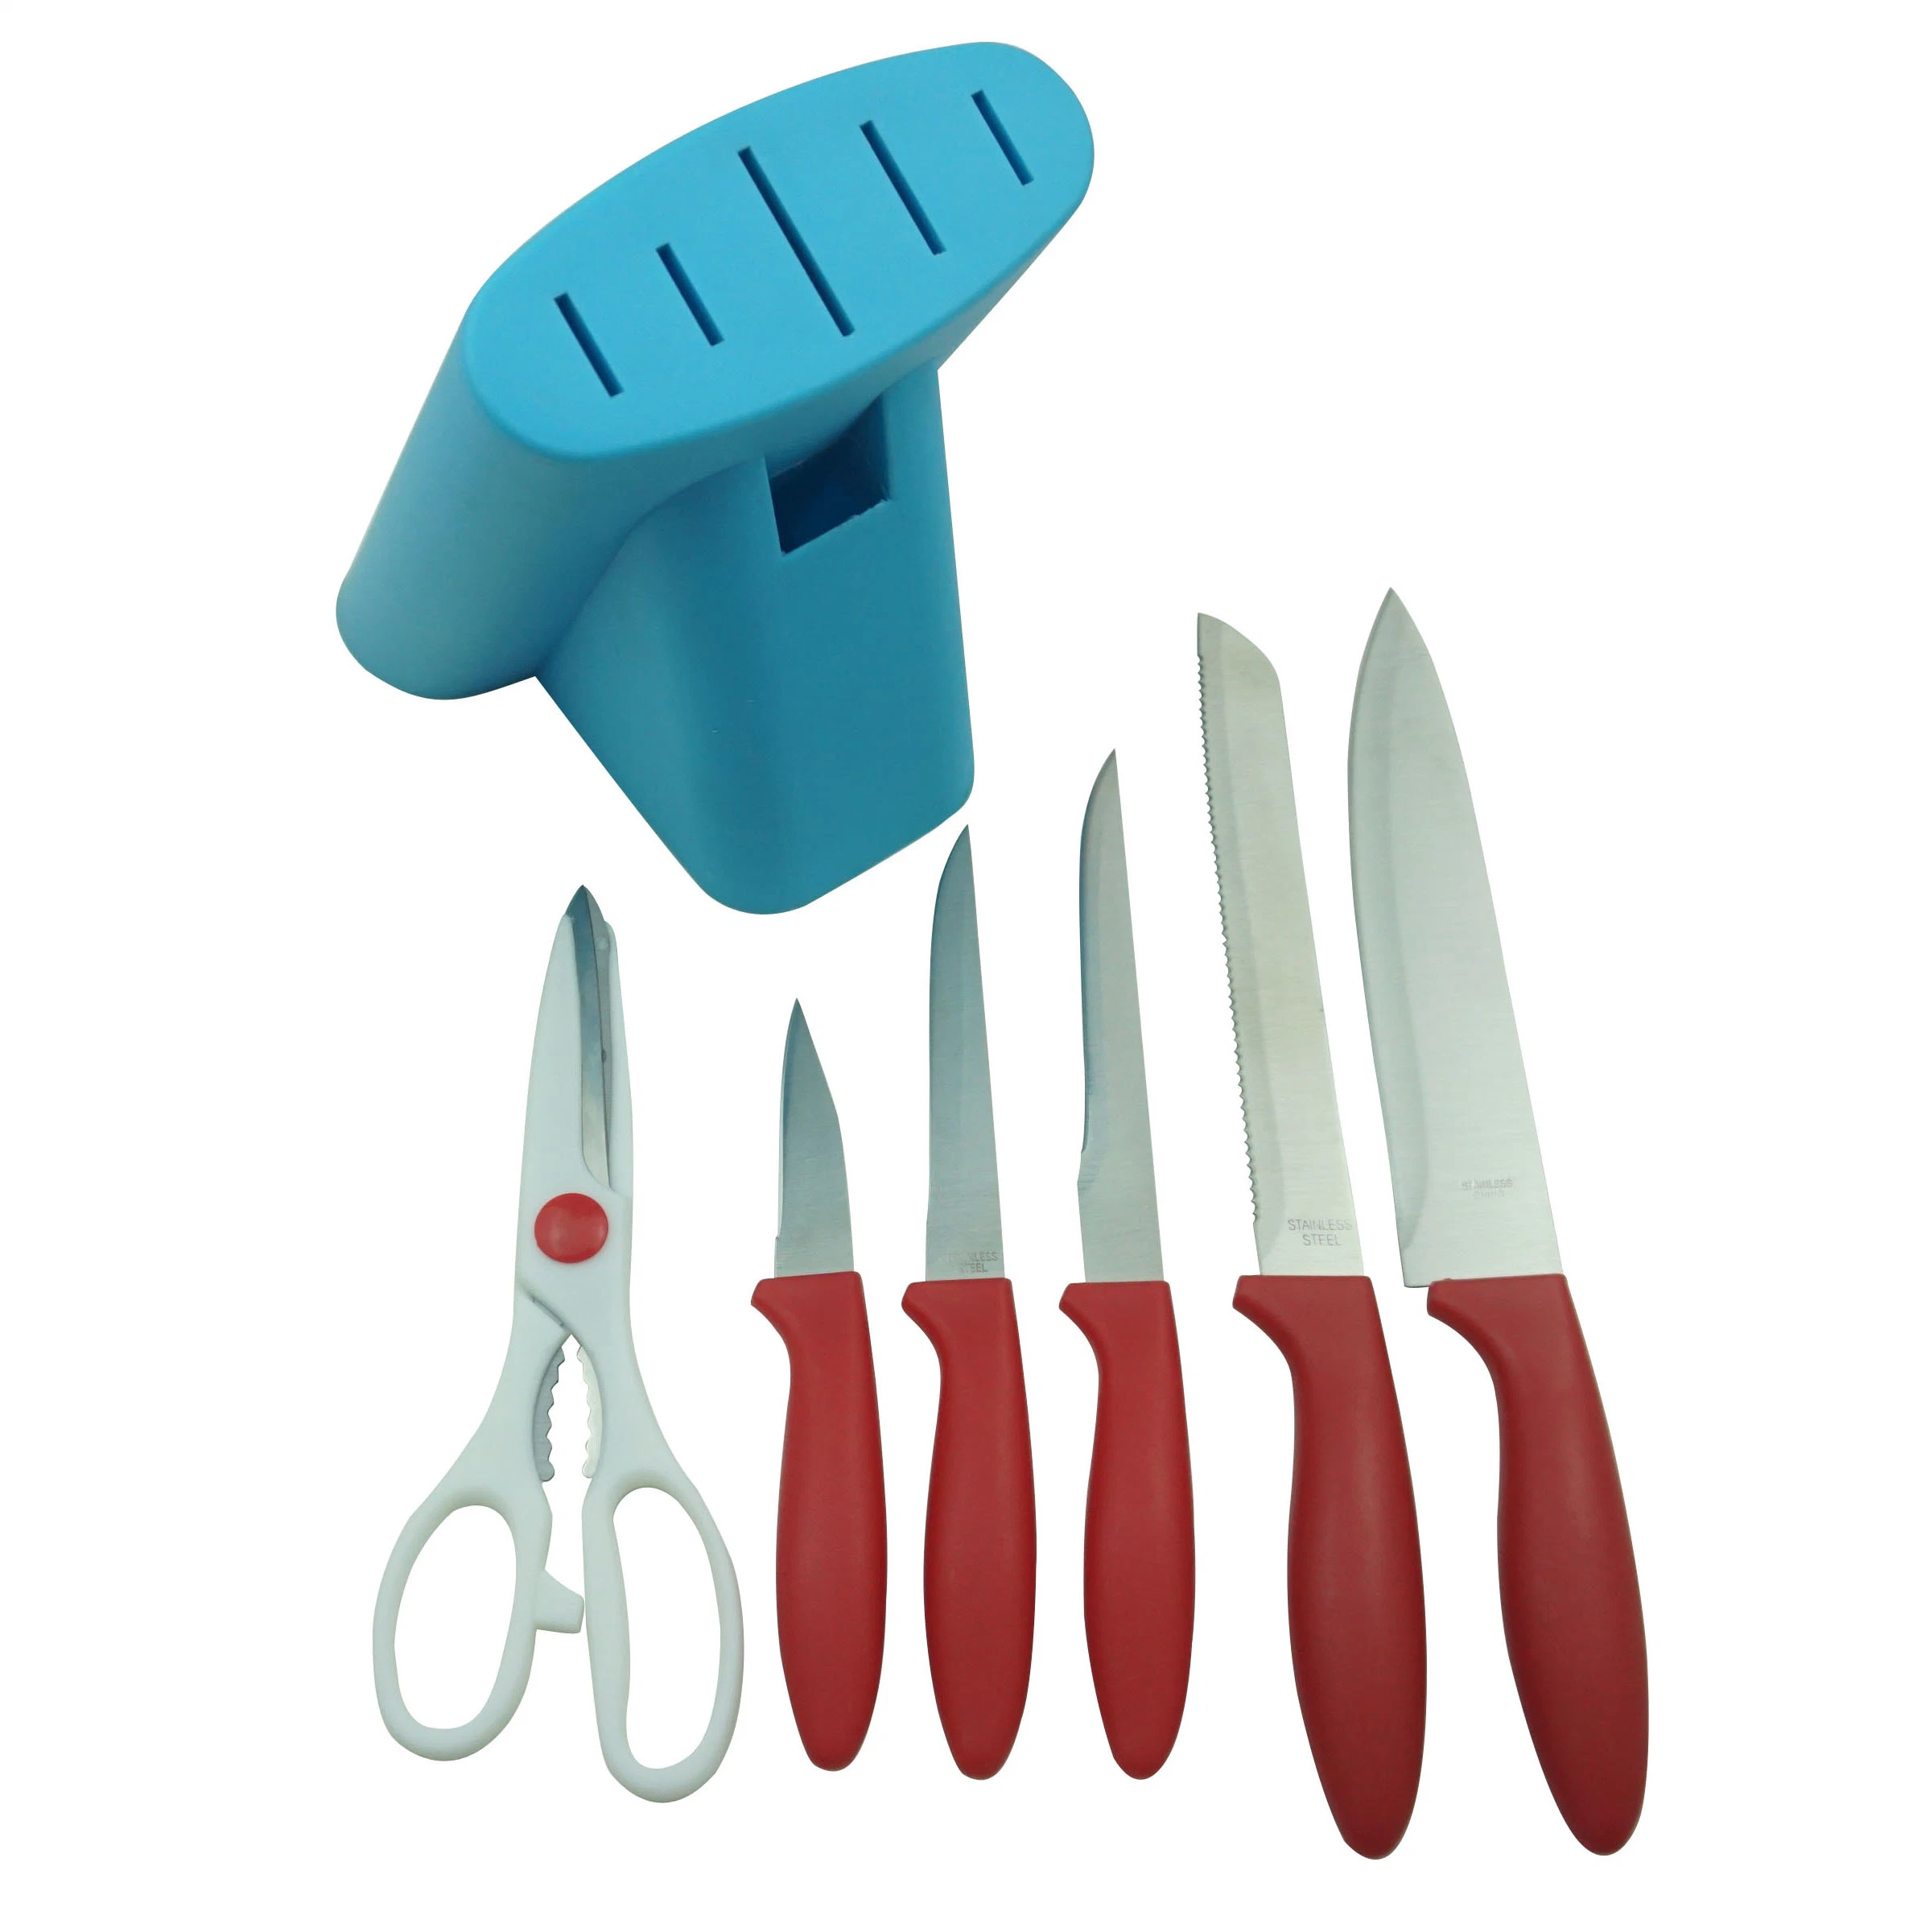 7-Piece Stainless Steel Kitchen Knife Set in Red Colour Handle